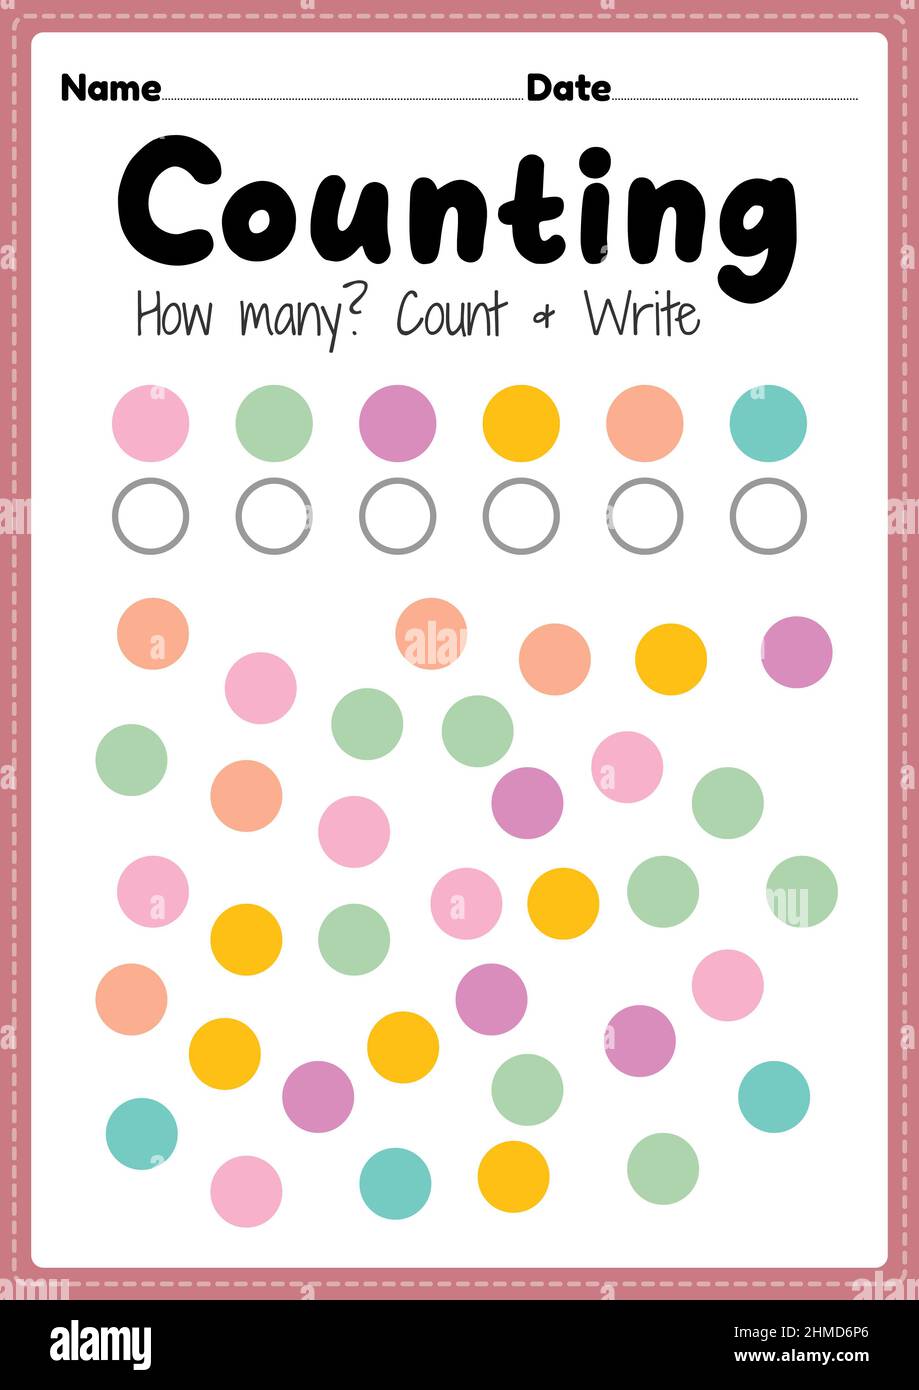 counting worksheet math printable sheet for preschool and kindergarten kids activity to learn basic mathematics count and write skills stock photo alamy